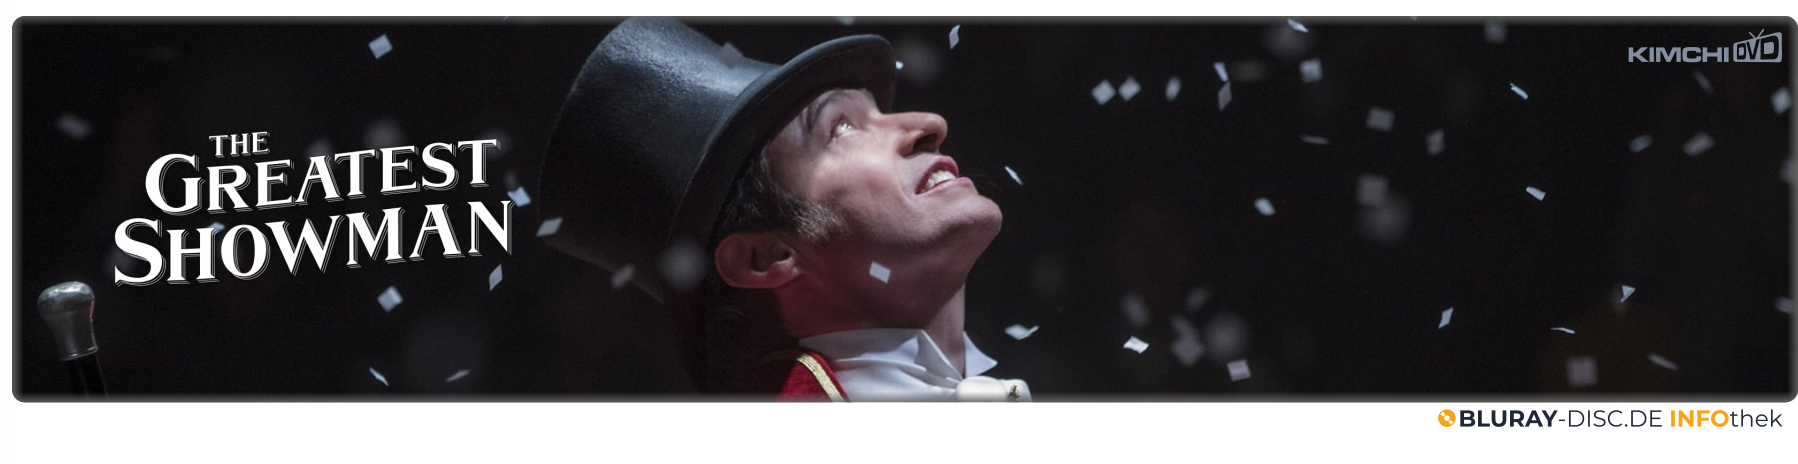 The_Greatest_Showman.png